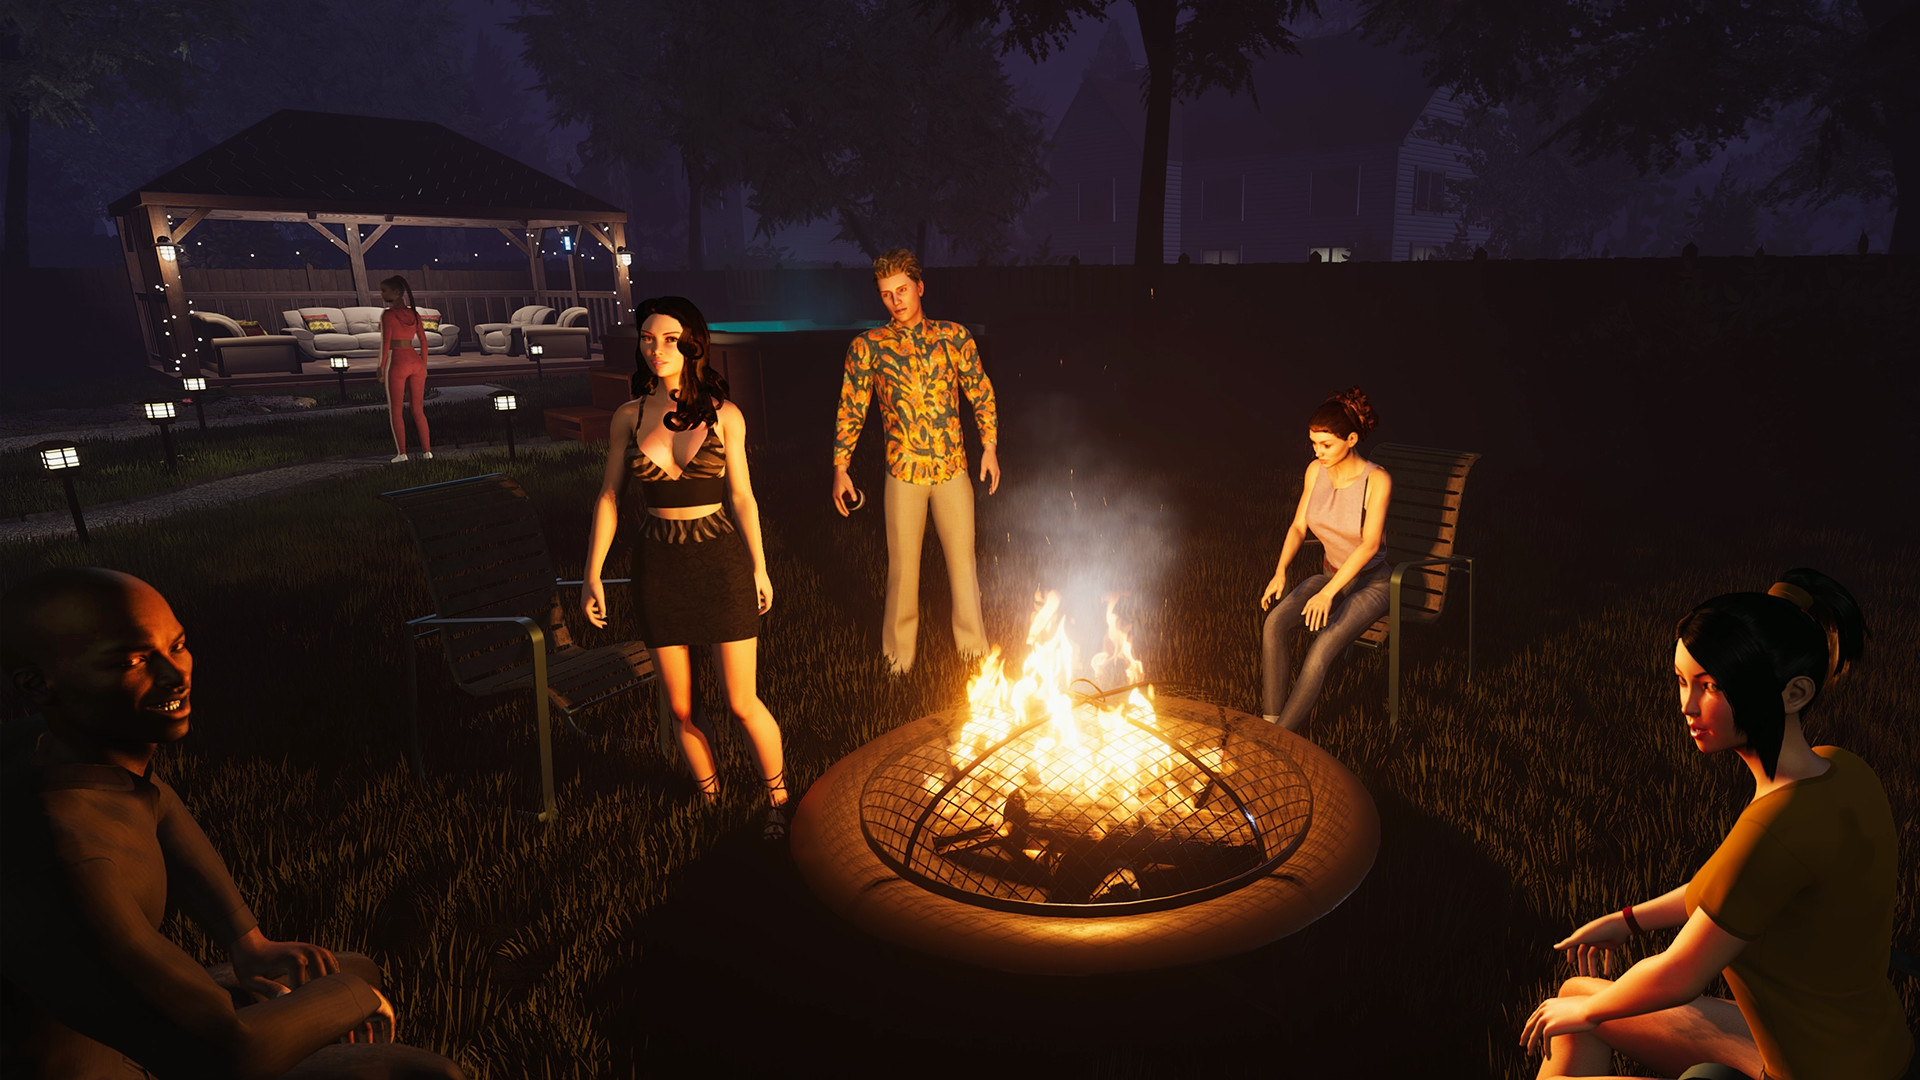 House Party screenshot